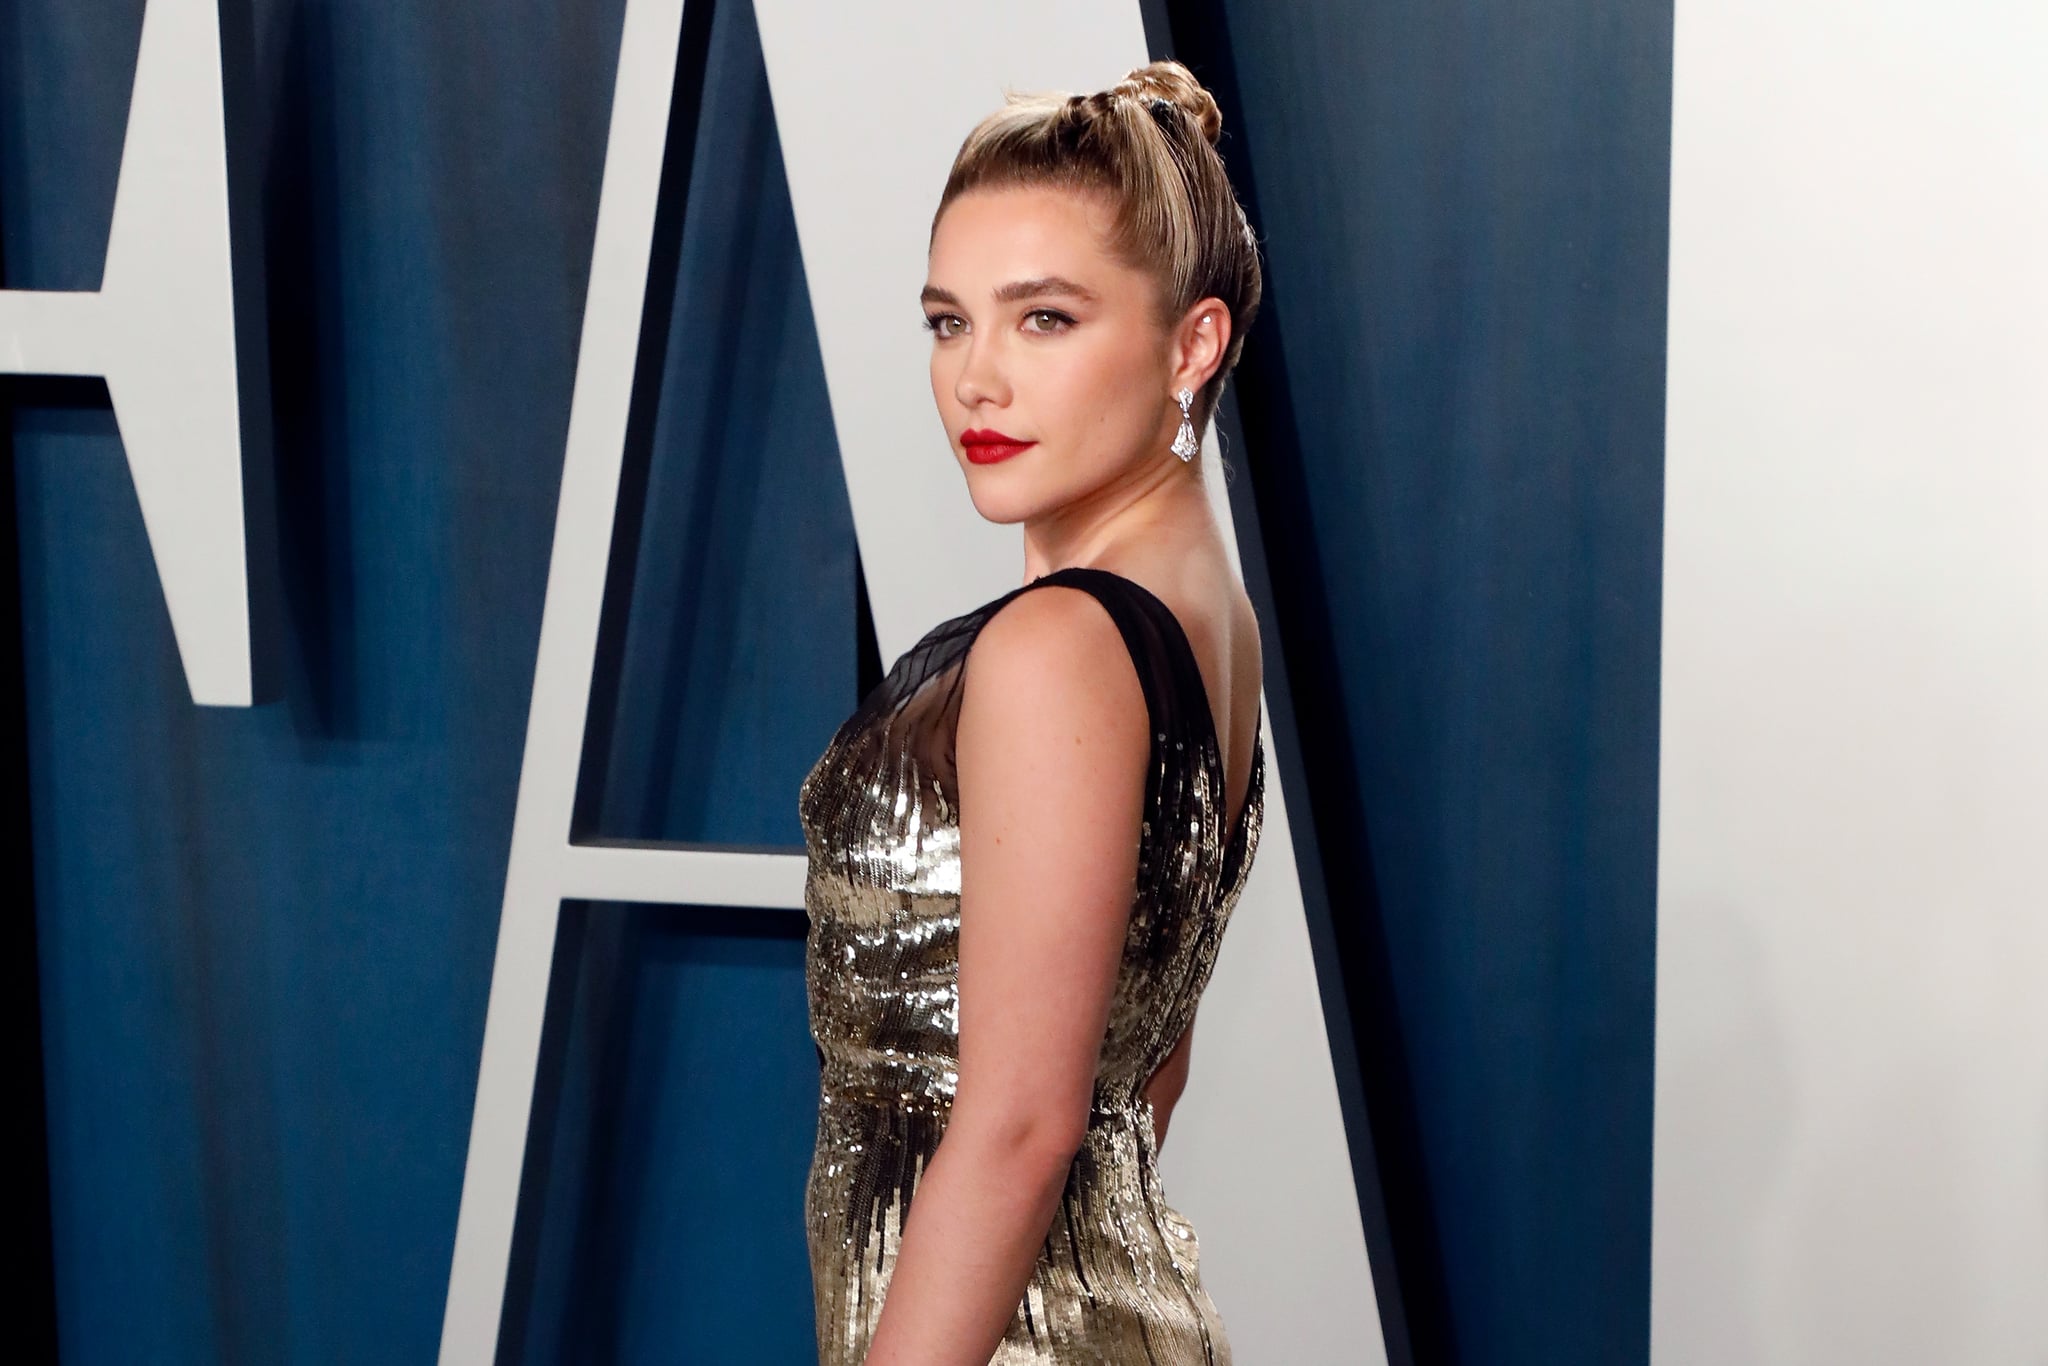 BEVERLY HILLS, CALIFORNIA - FEBRUARY 09: Florence Pugh attends the Vanity Fair Oscar Party at Wallis Annenberg Center for the Performing Arts on February 09, 2020 in Beverly Hills, California. (Photo by Taylor Hill/FilmMagic,)